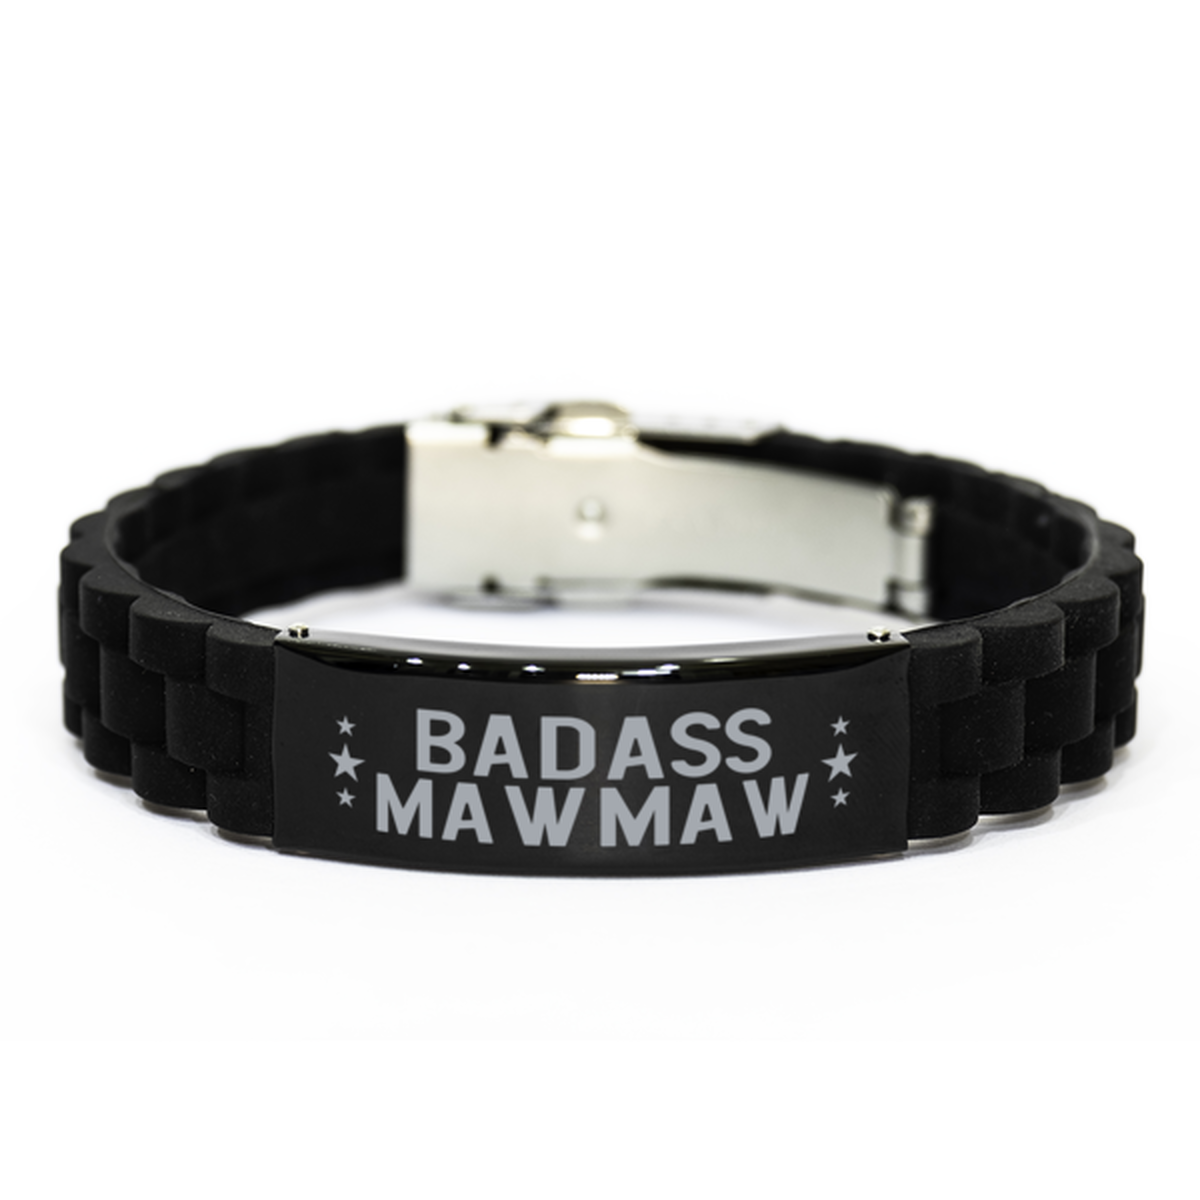 Mawmaw Black Bracelet, Badass Mawmaw, Funny Family Gifts For Mawmaw From Granddaughter Grandson